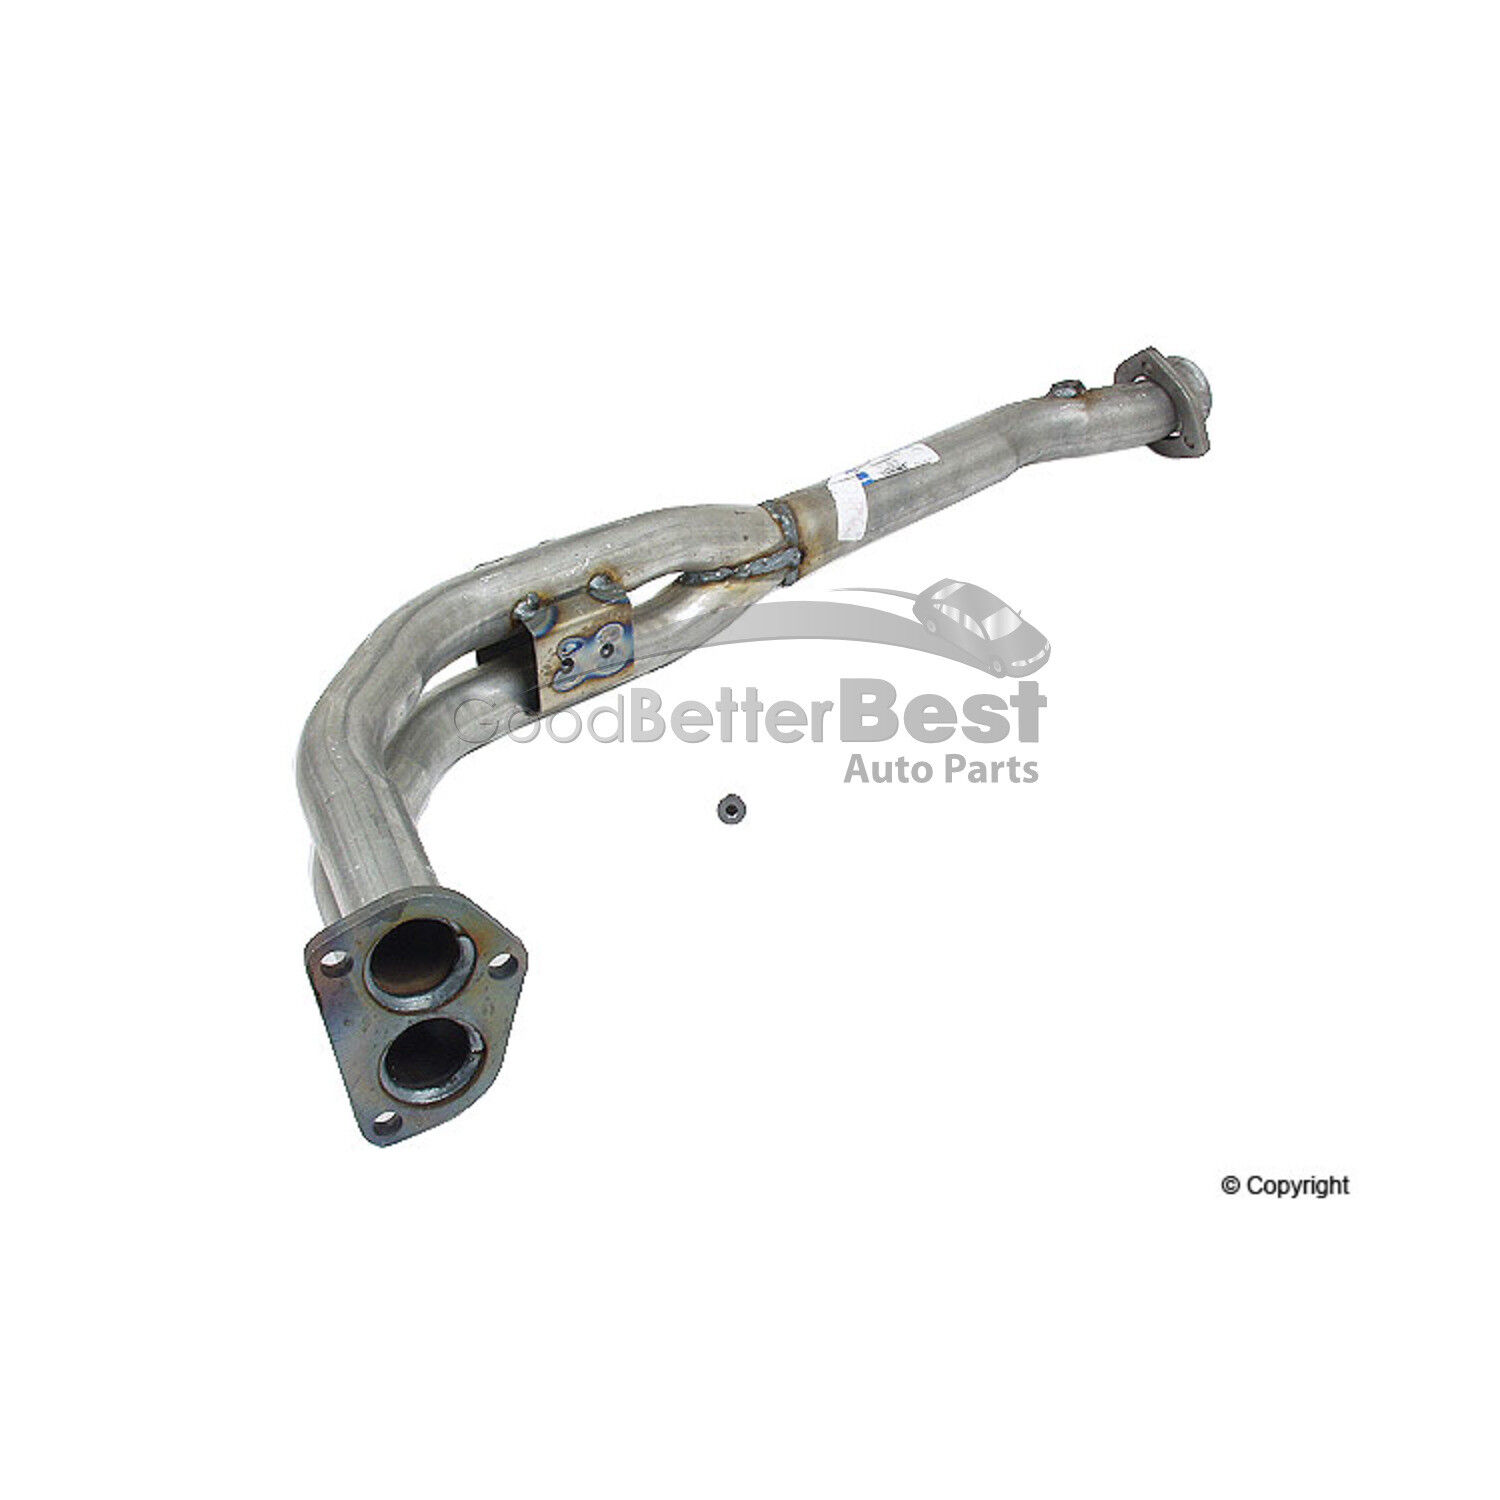 One New Starla Exhaust Pipe 17570 3514169 for Volvo 740 940